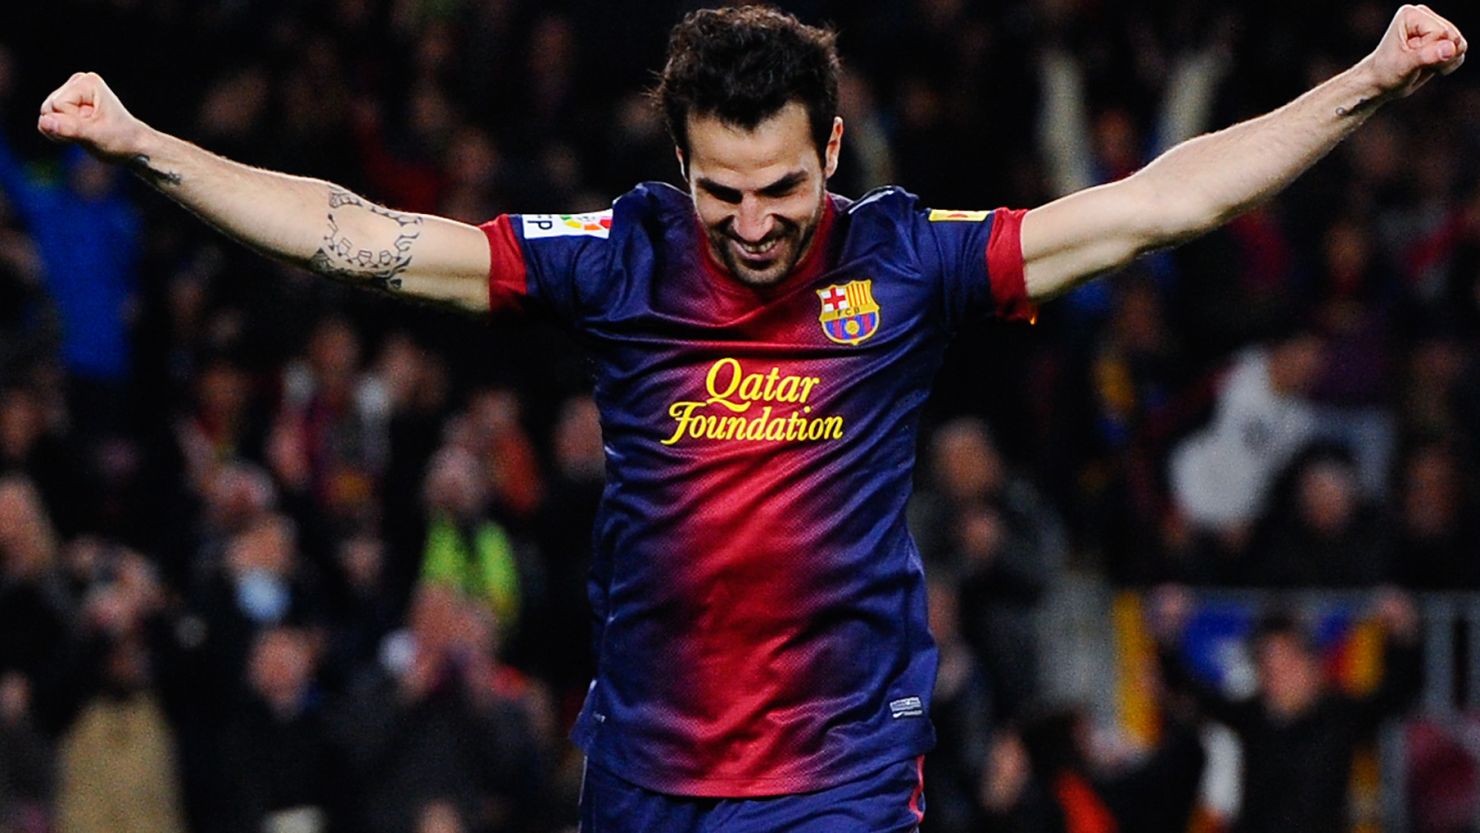 Cesc Fabregas spent eight years with Arsenal in between spells at his first club Barcelona.